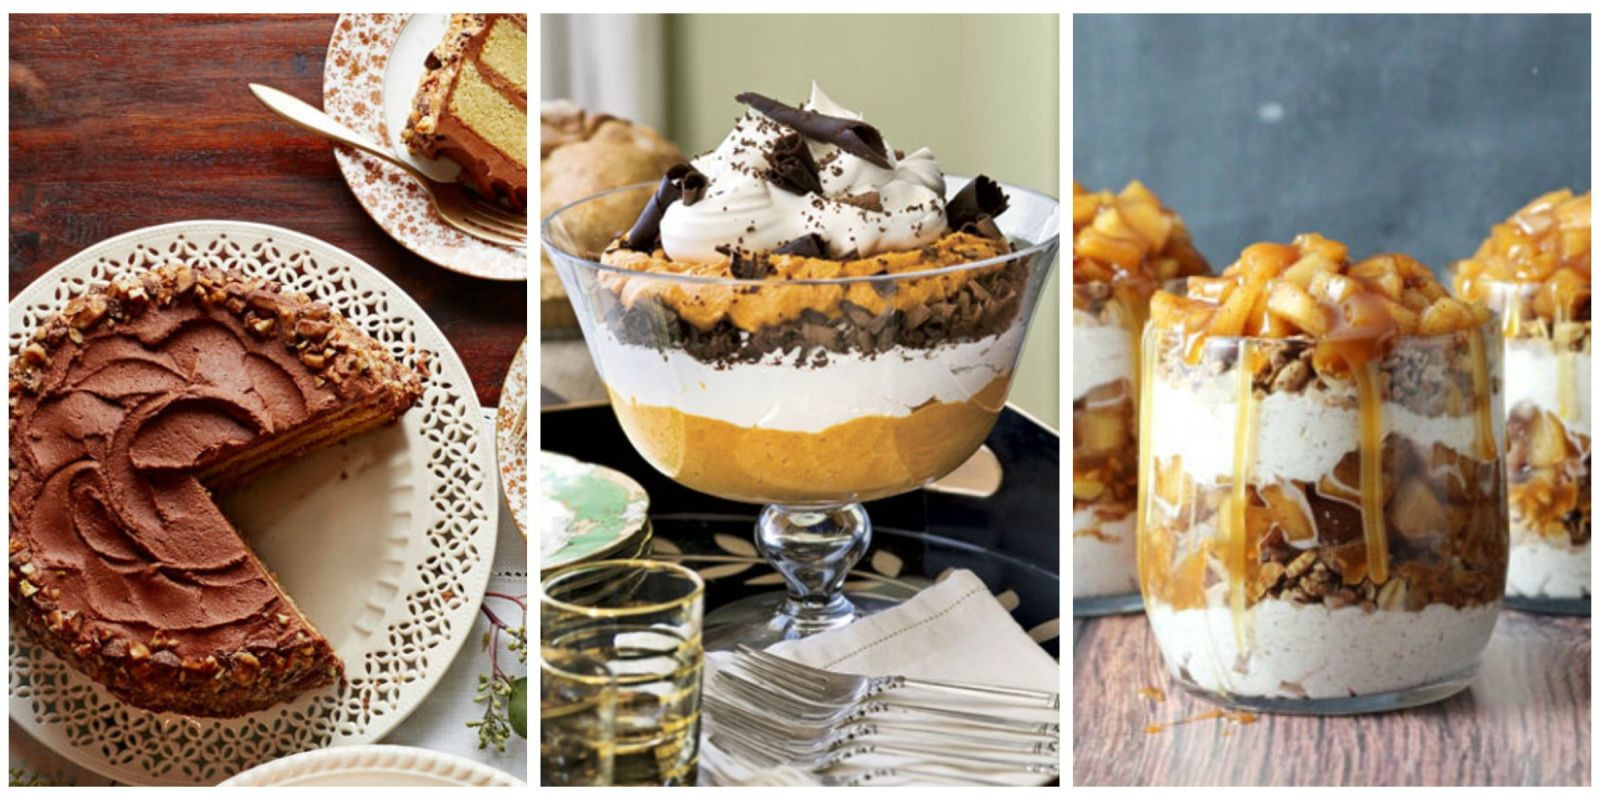 Thanksgiving Desserts Recipes
 40 Easy Thanksgiving Desserts Recipes Best Ideas for